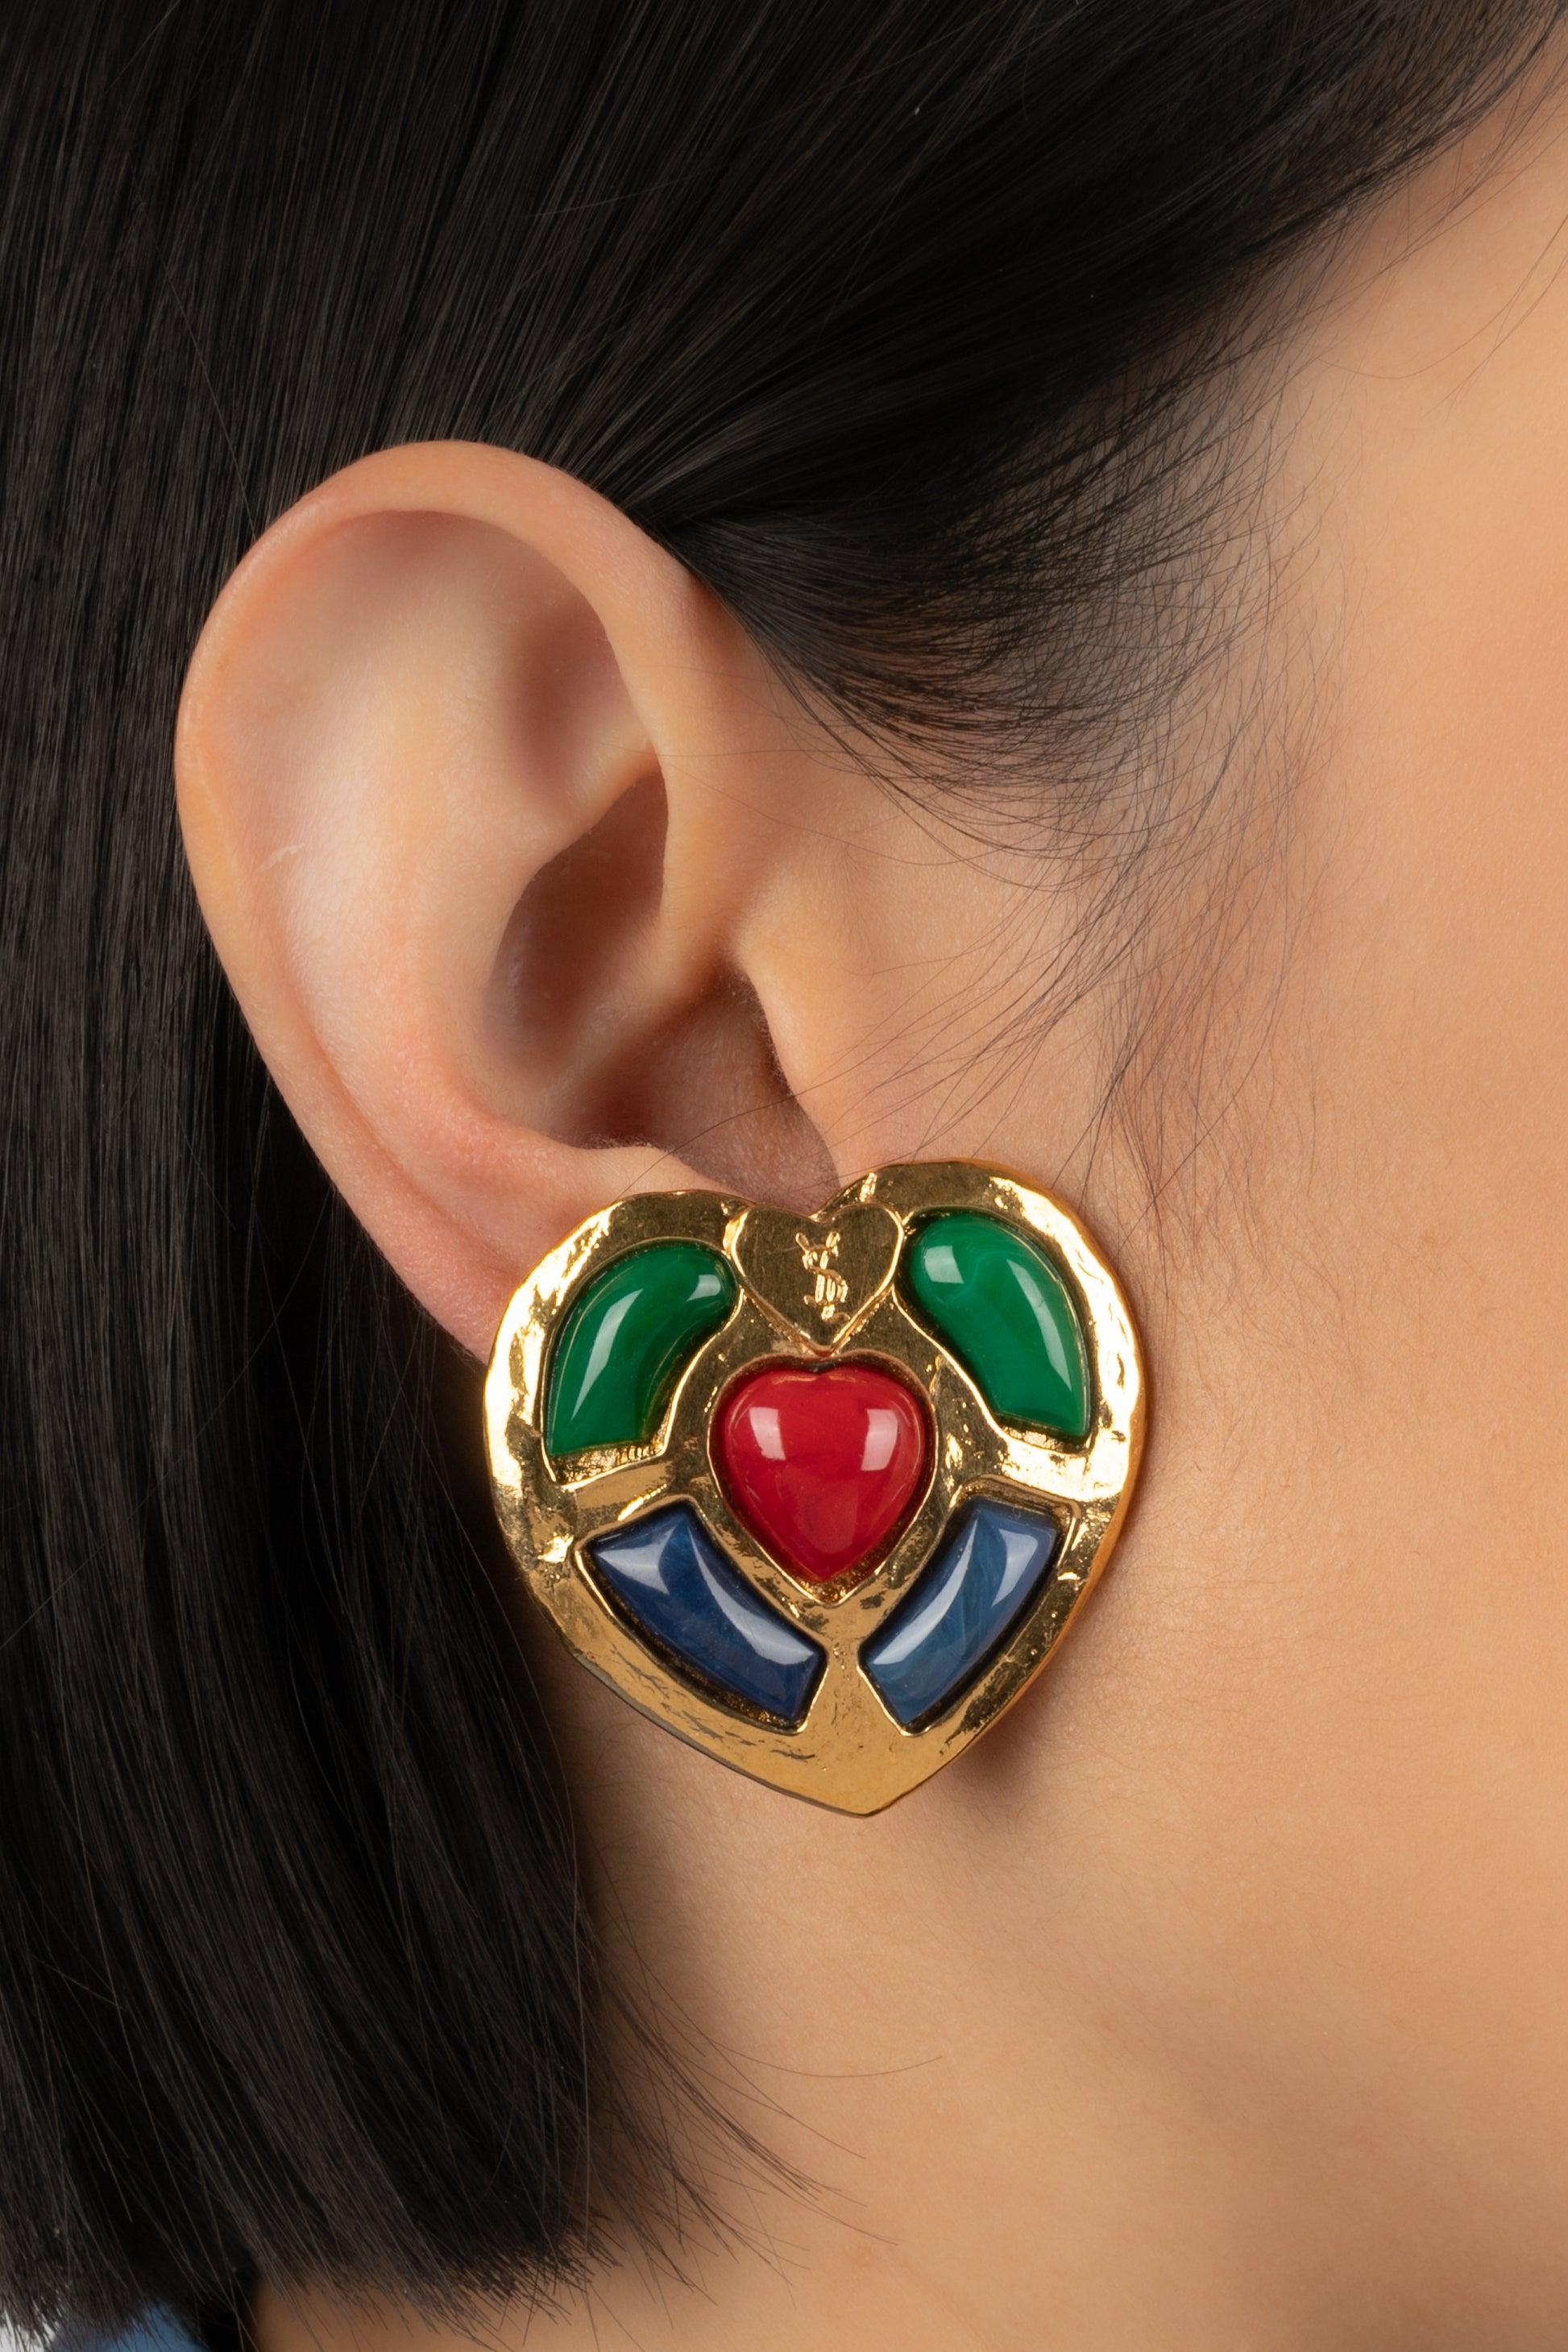 Yves Saint Laurent - (Made in France) Golden metal clip-on earrings with glass paste cabochons, representing a heart. Jewelry from the middle of the 1980s.

Additional information:
Condition: Very good condition
Dimensions: 4 cm x 4 cm
Period: 20th